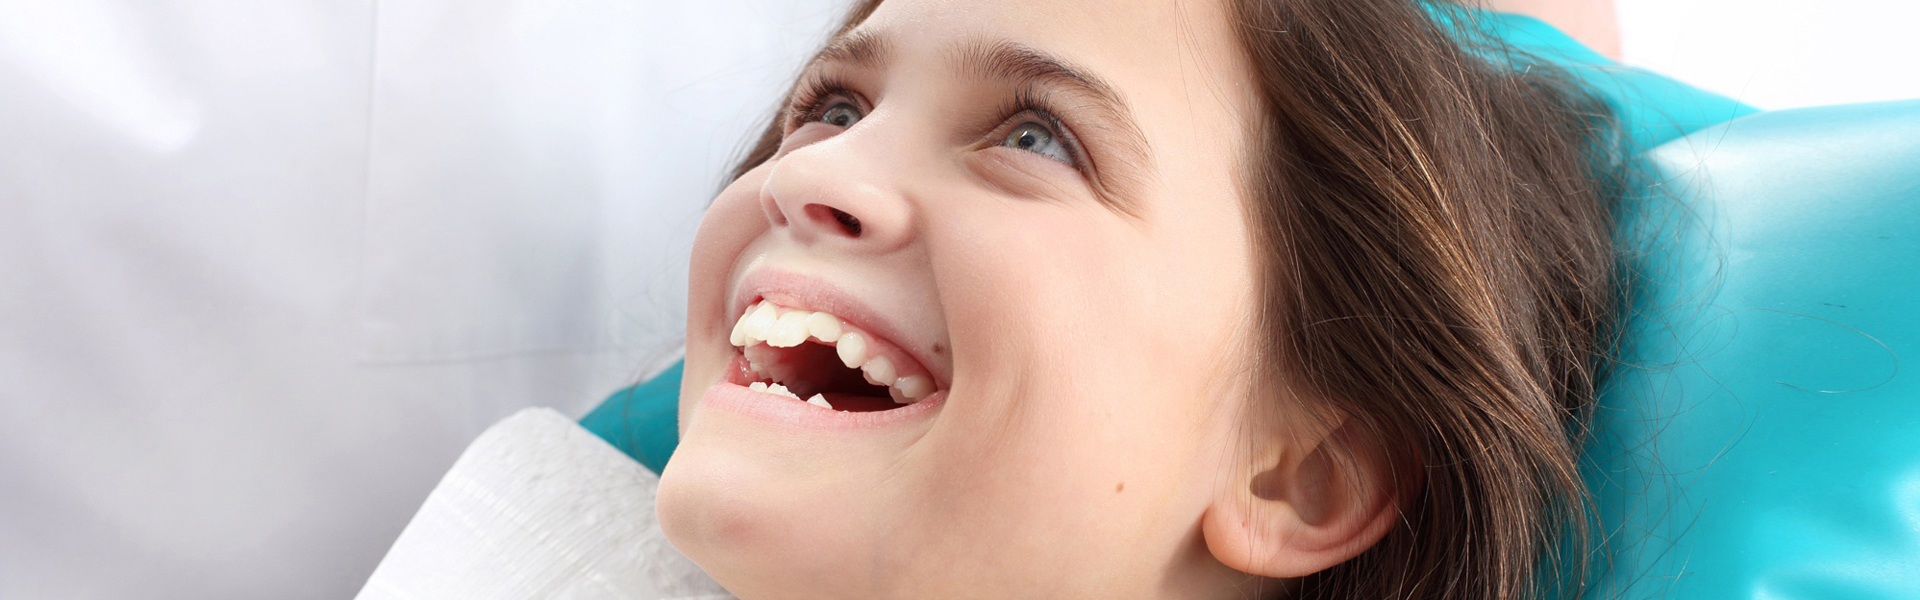 Common Dental Issues Treated in Pediatric Dentistry